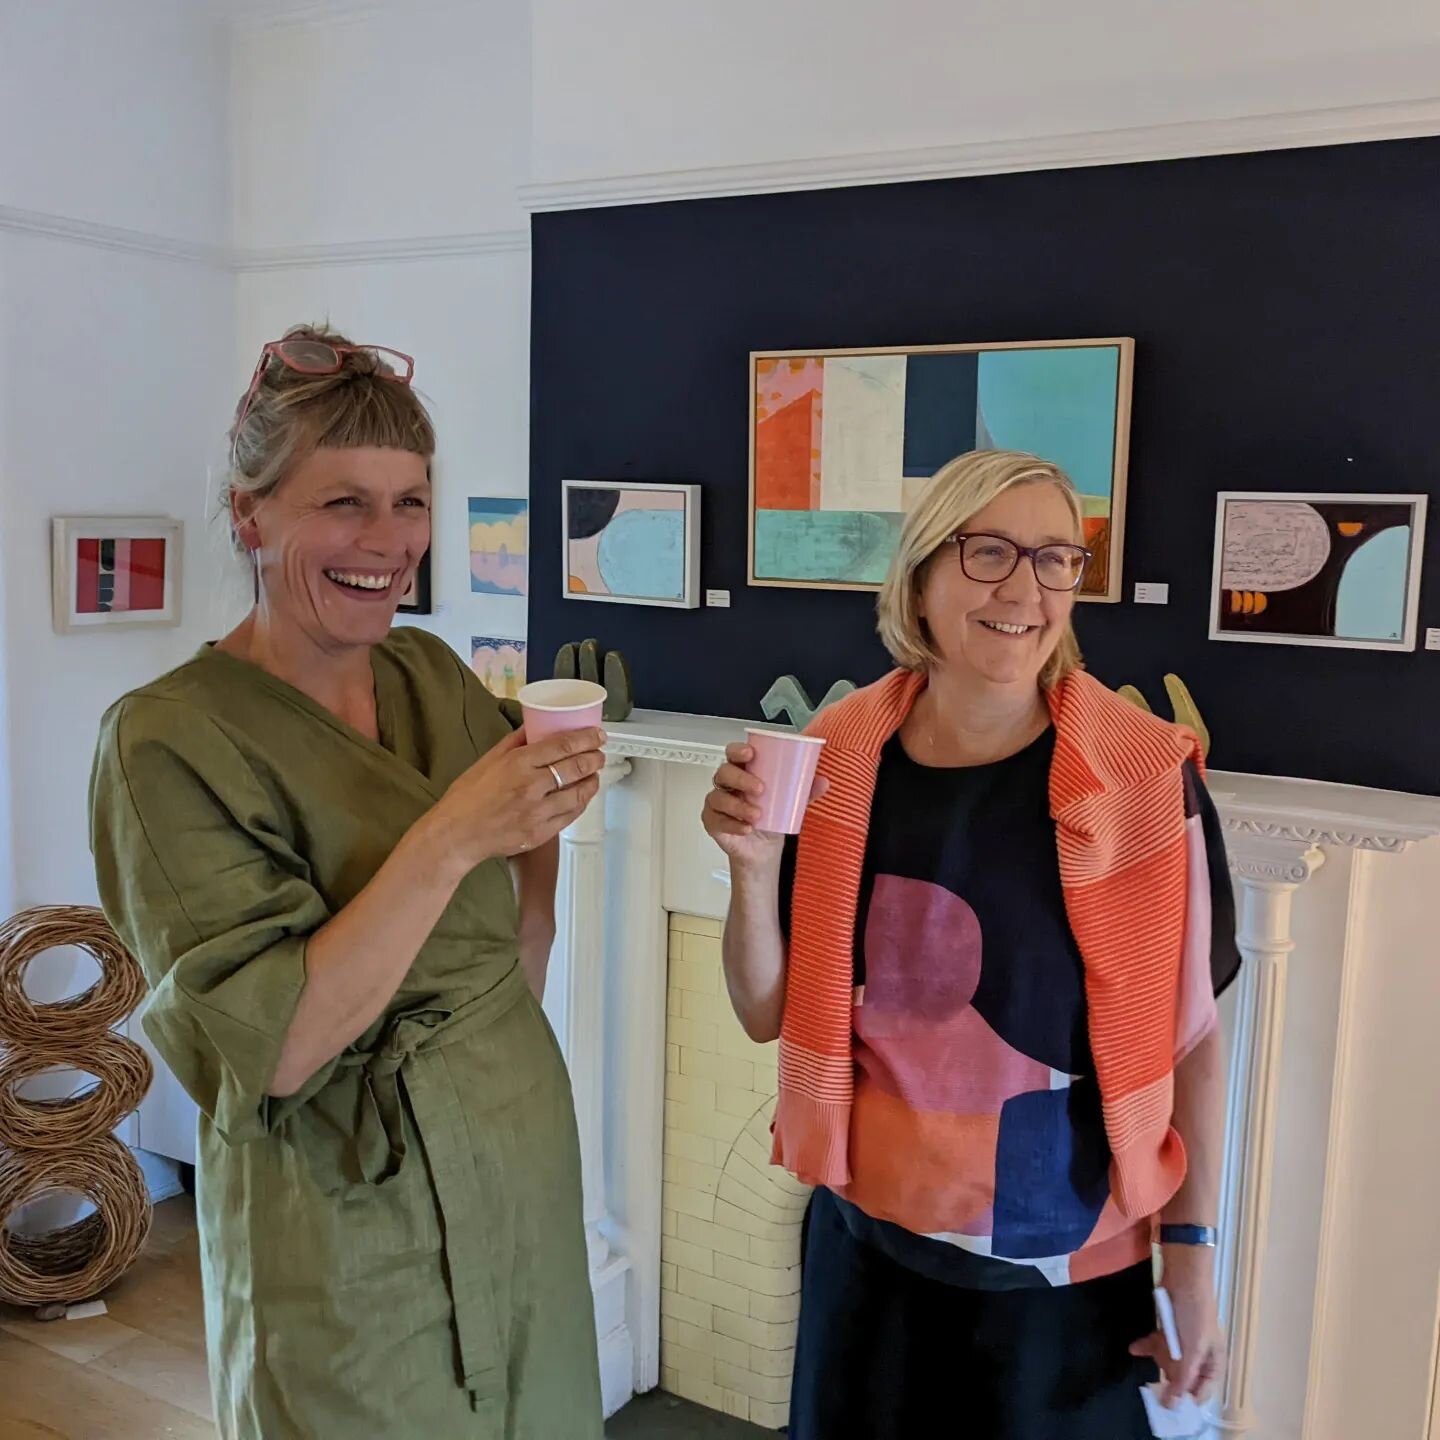 A quick hello from myself and artist&nbsp;@JuliaClarkeartist. This is us exhibiting together in&nbsp;@ceosopenstudios in my home in 2022. This year, the two of us have stepped up to co-chair the Crouch End Open Studios art trail in May, working with 